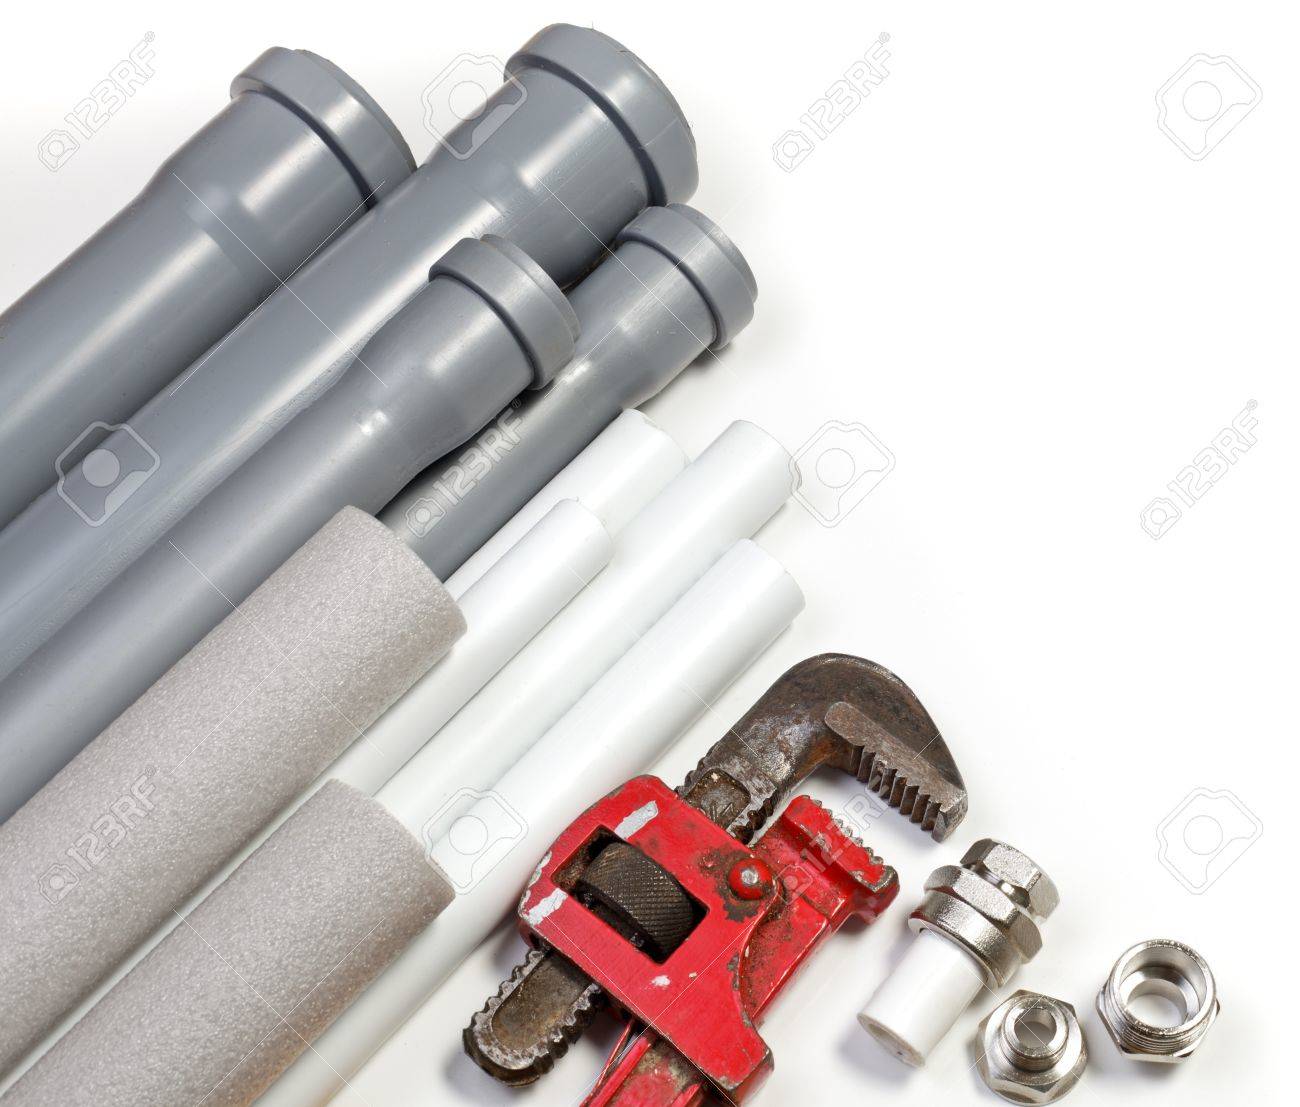 Plumbing Tool Pipes And Fittings On White Background Stock Photo